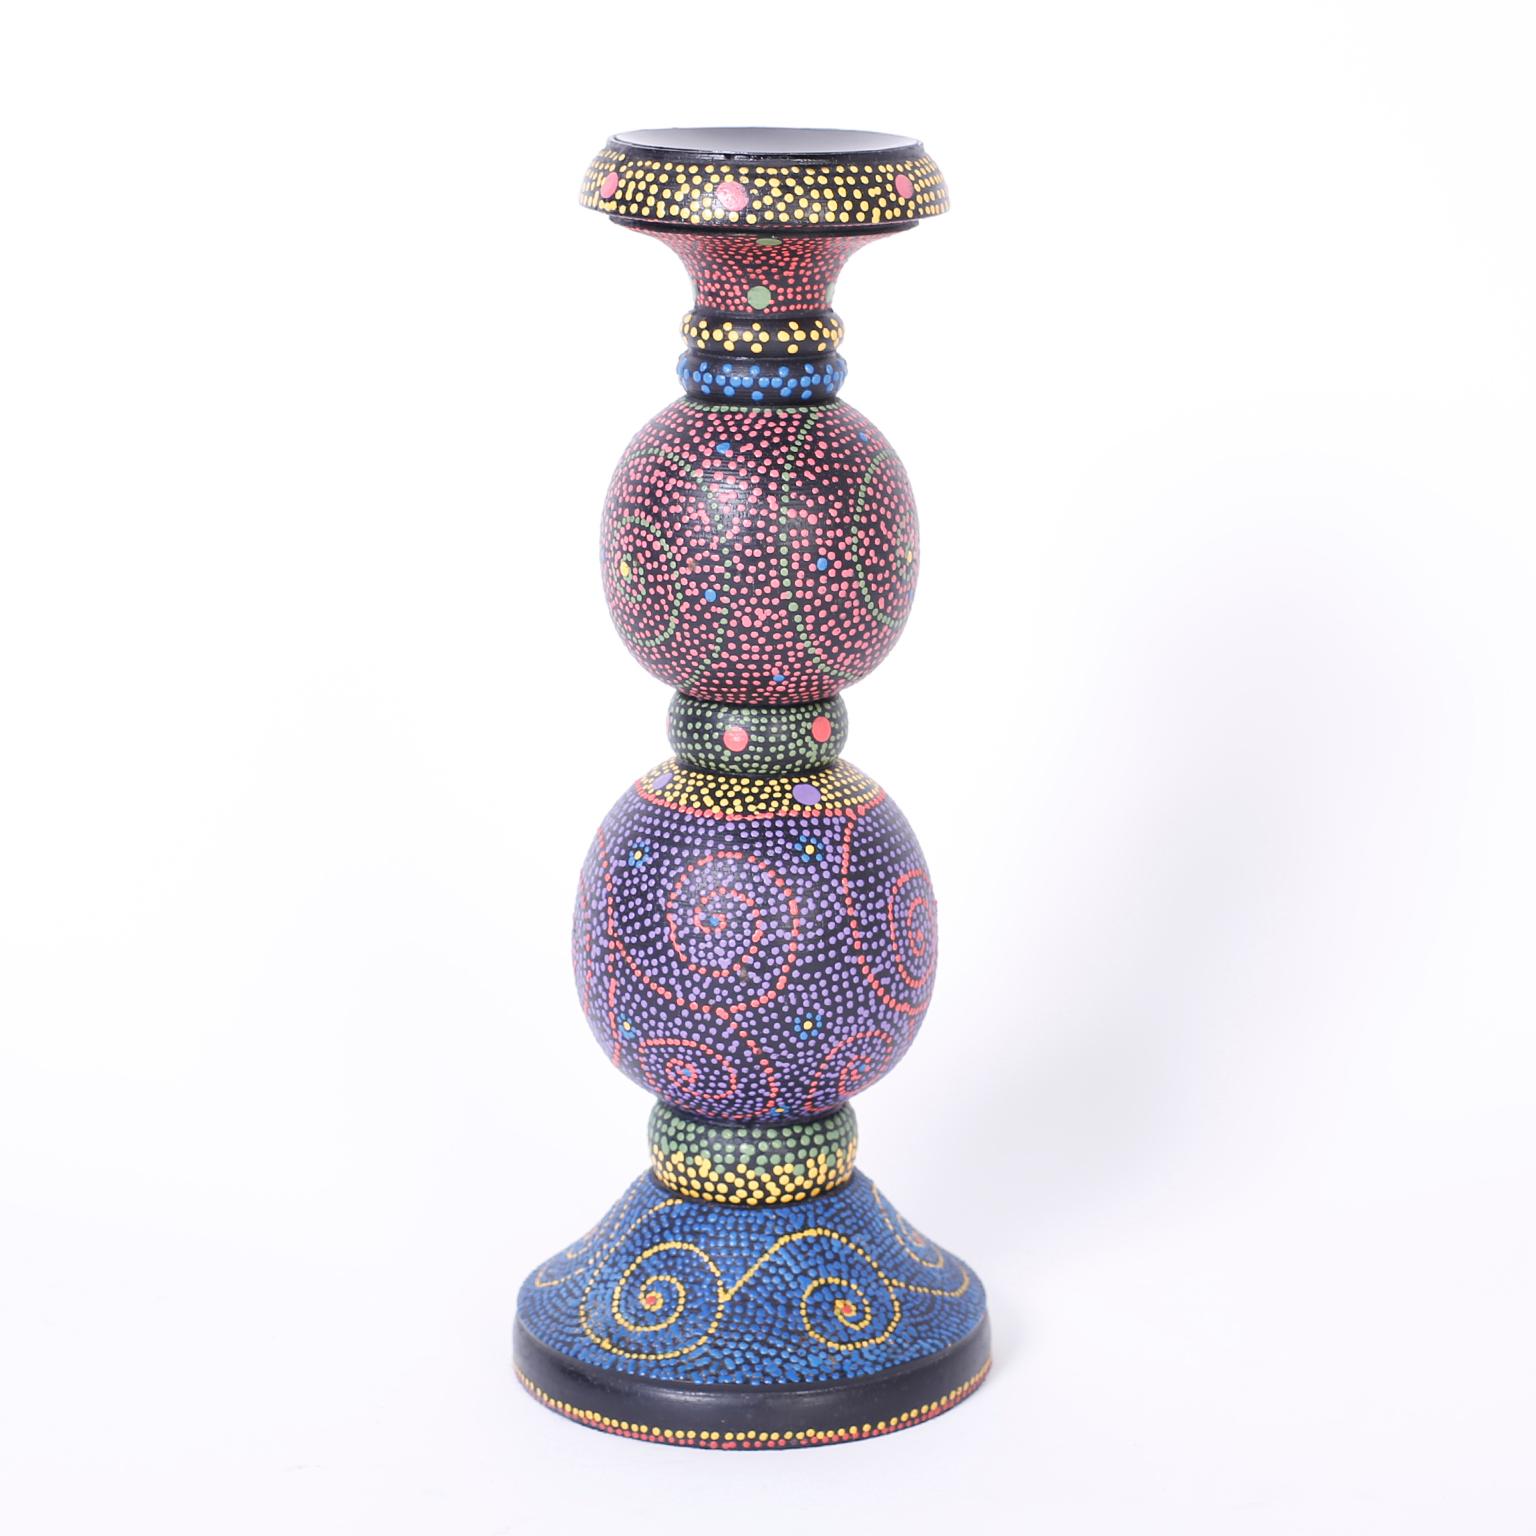 Whimsical pair of wood candle sticks with a Classic double bulb form and painted in a colorful pointillist technique giving the illusion of a micro mosaic.